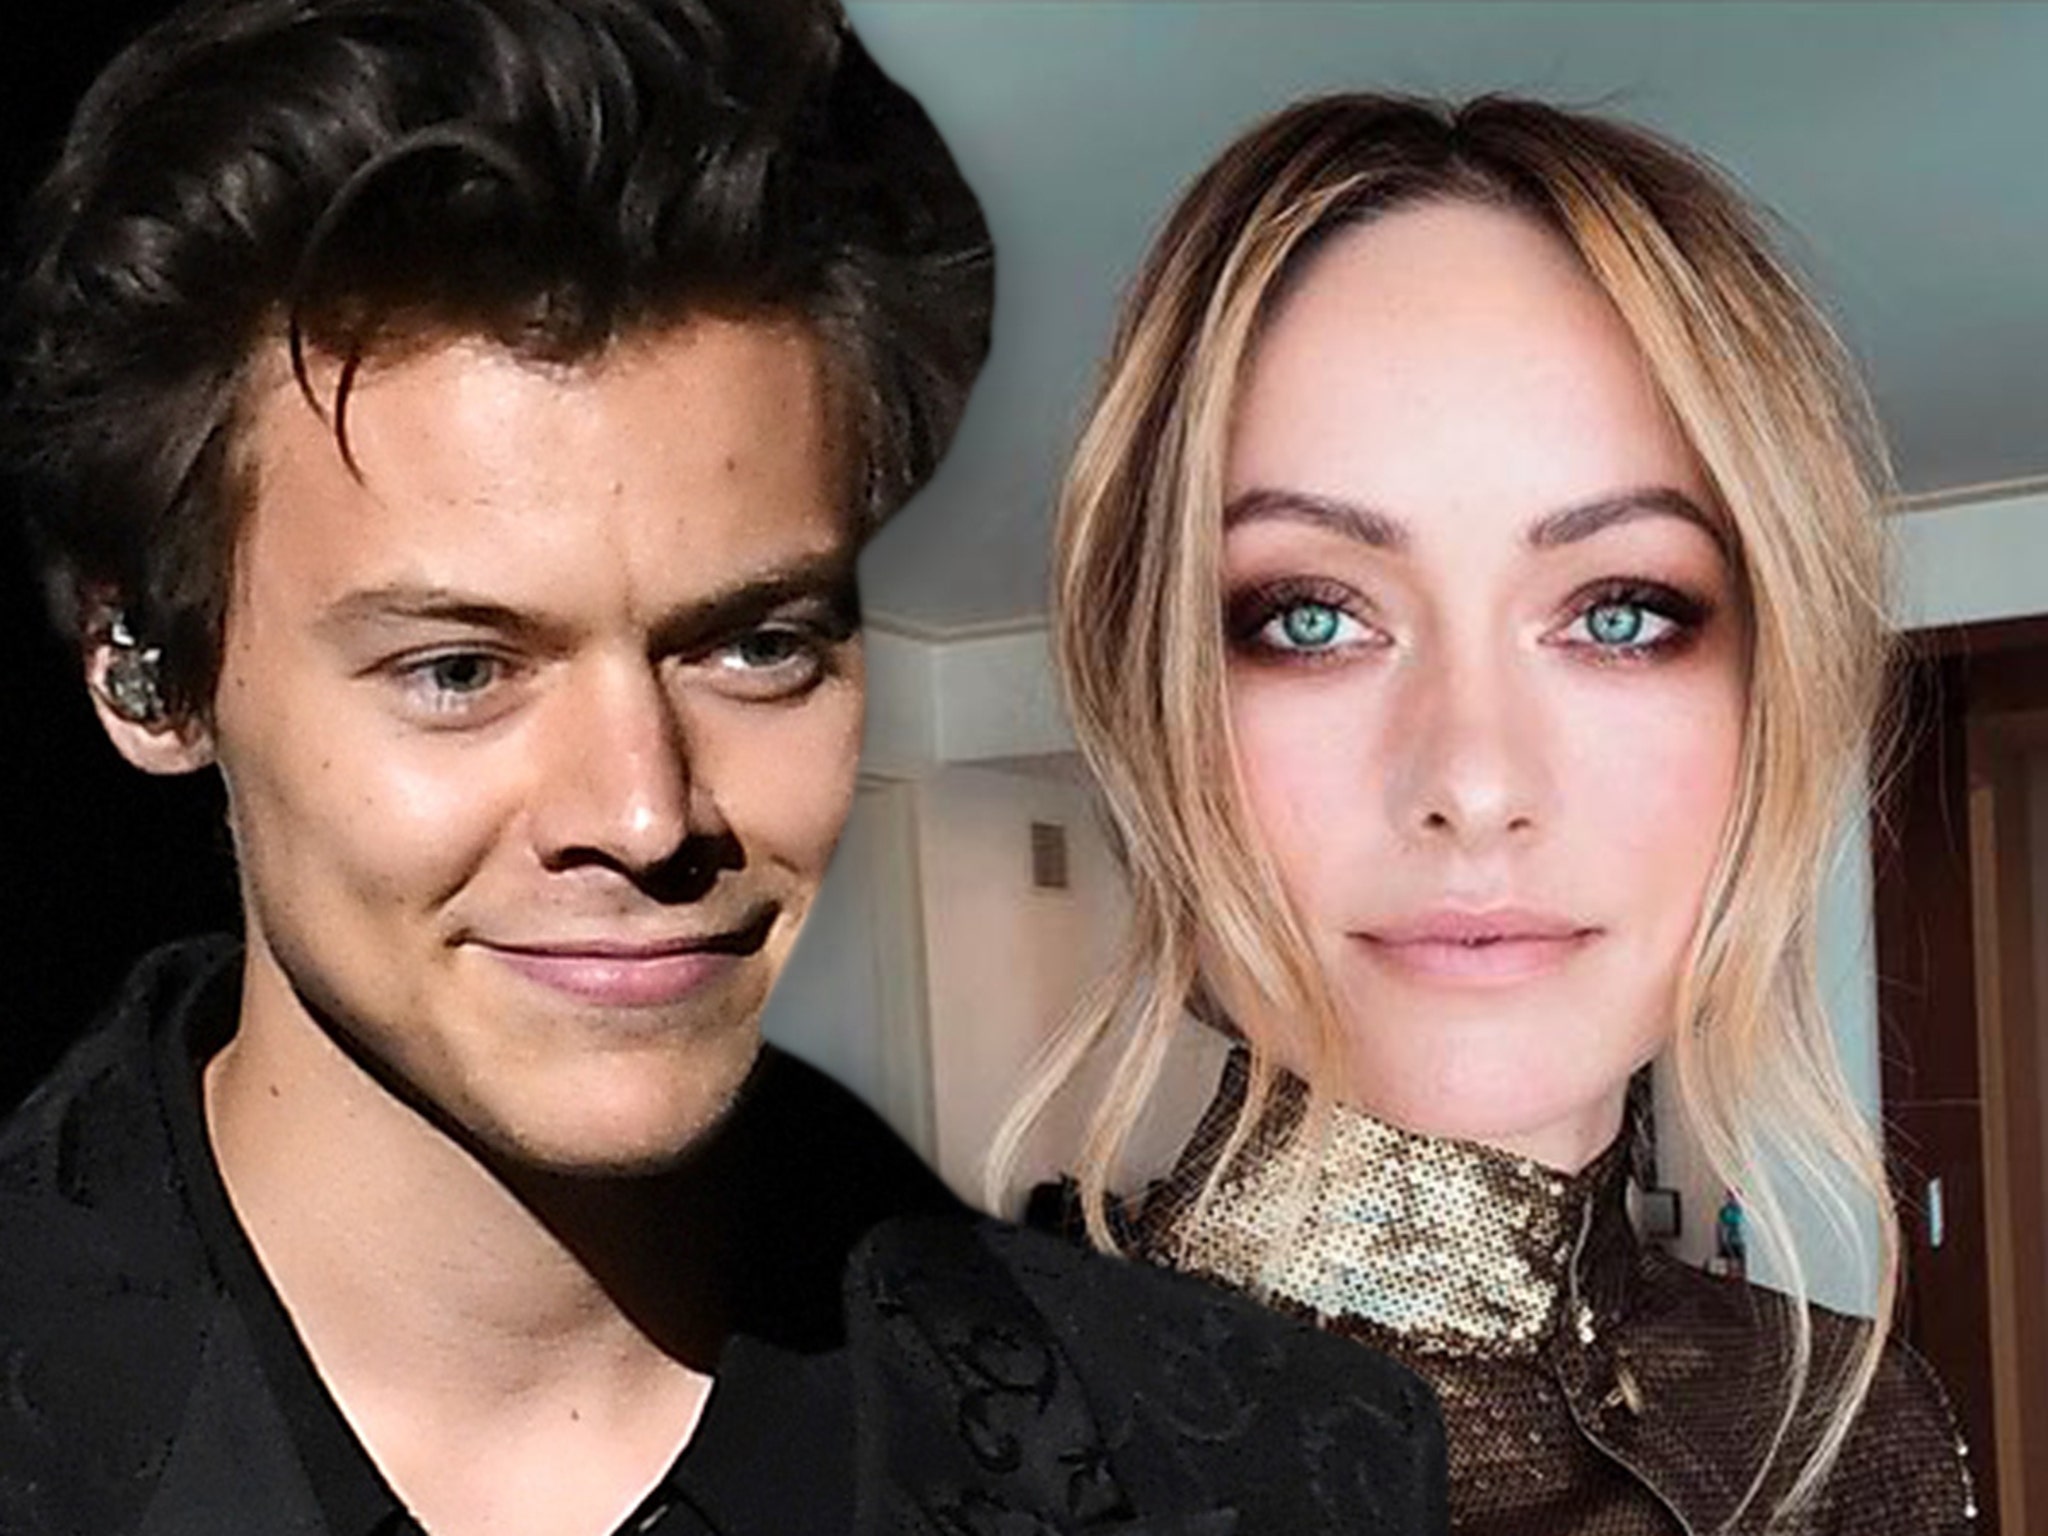 Harry Styles and Olivia Wilde Are a New Couple!!!